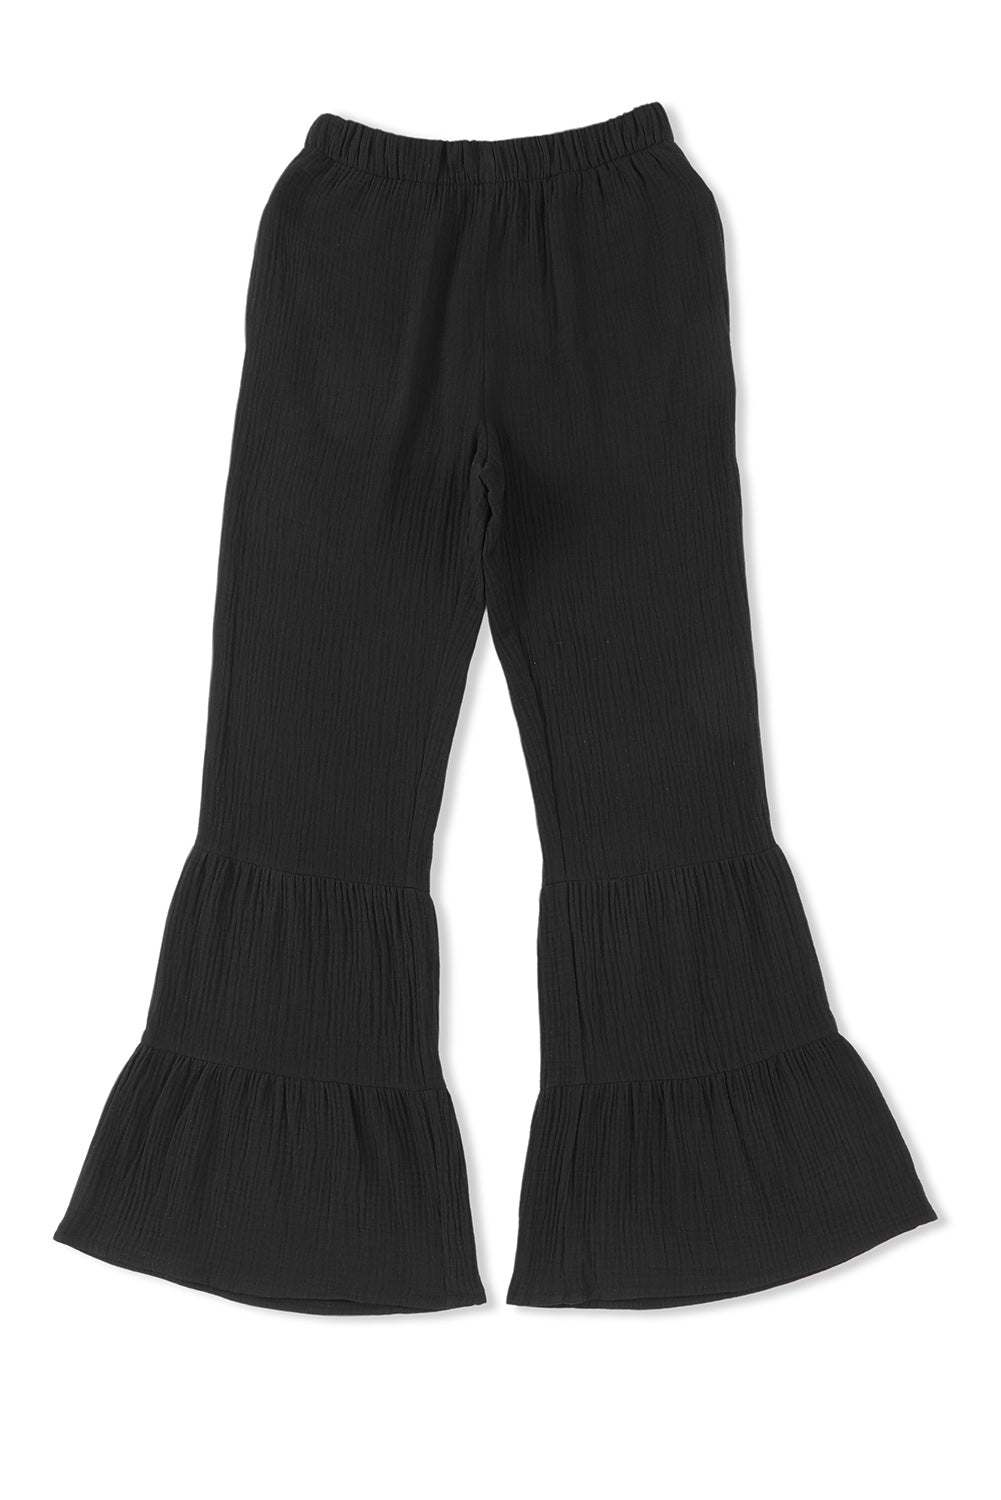 Long Flare Pants with Pocket - AllIn Computer